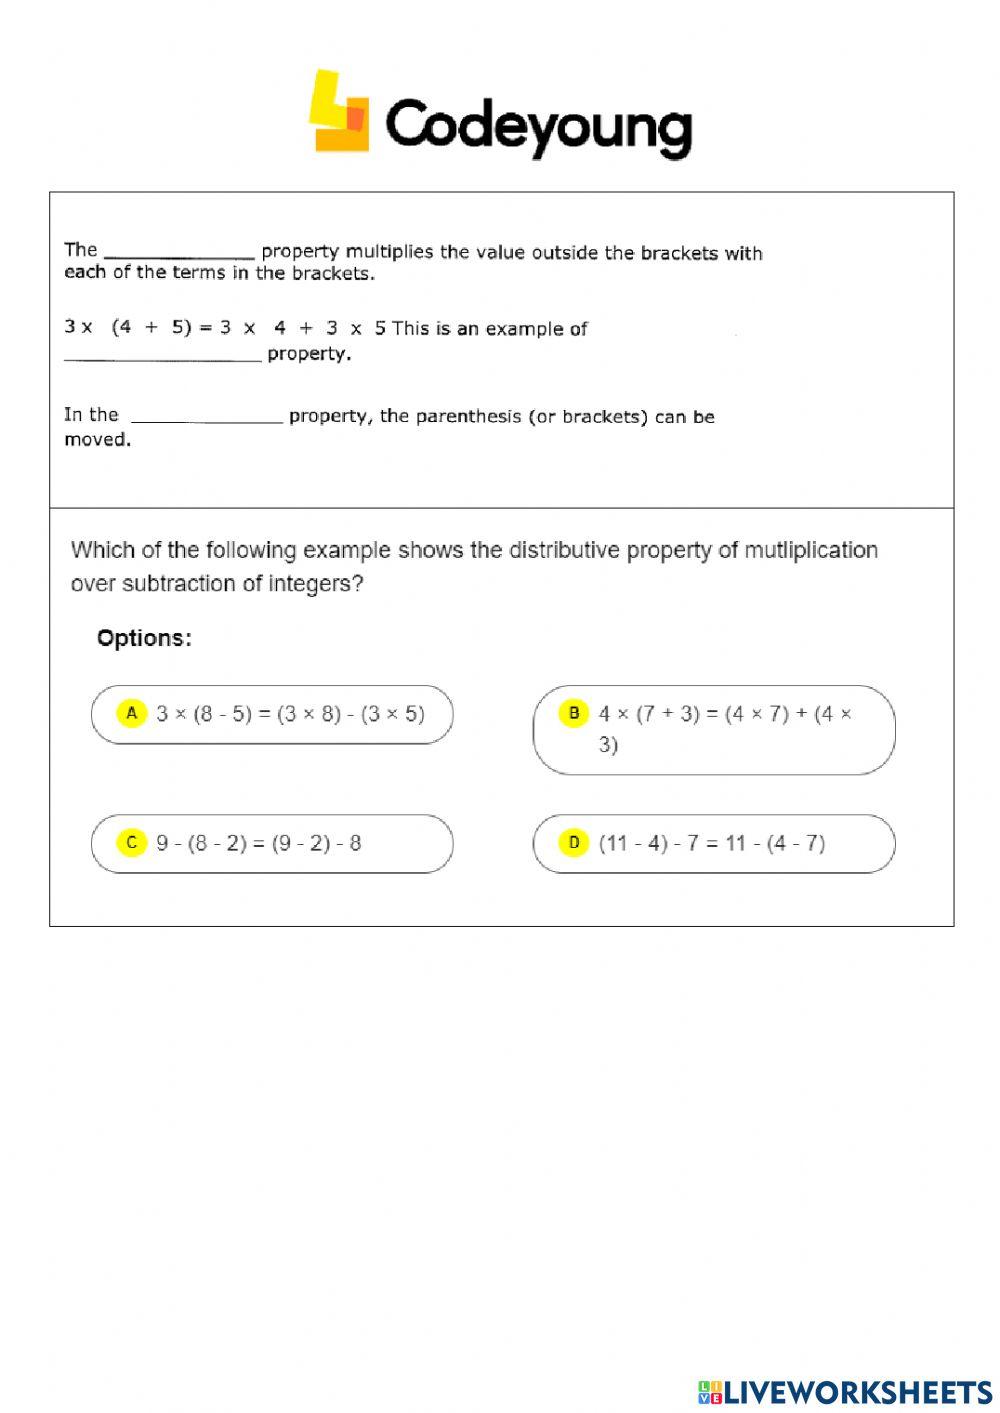 Properties of Integer Addition and Subtraction Concept HW